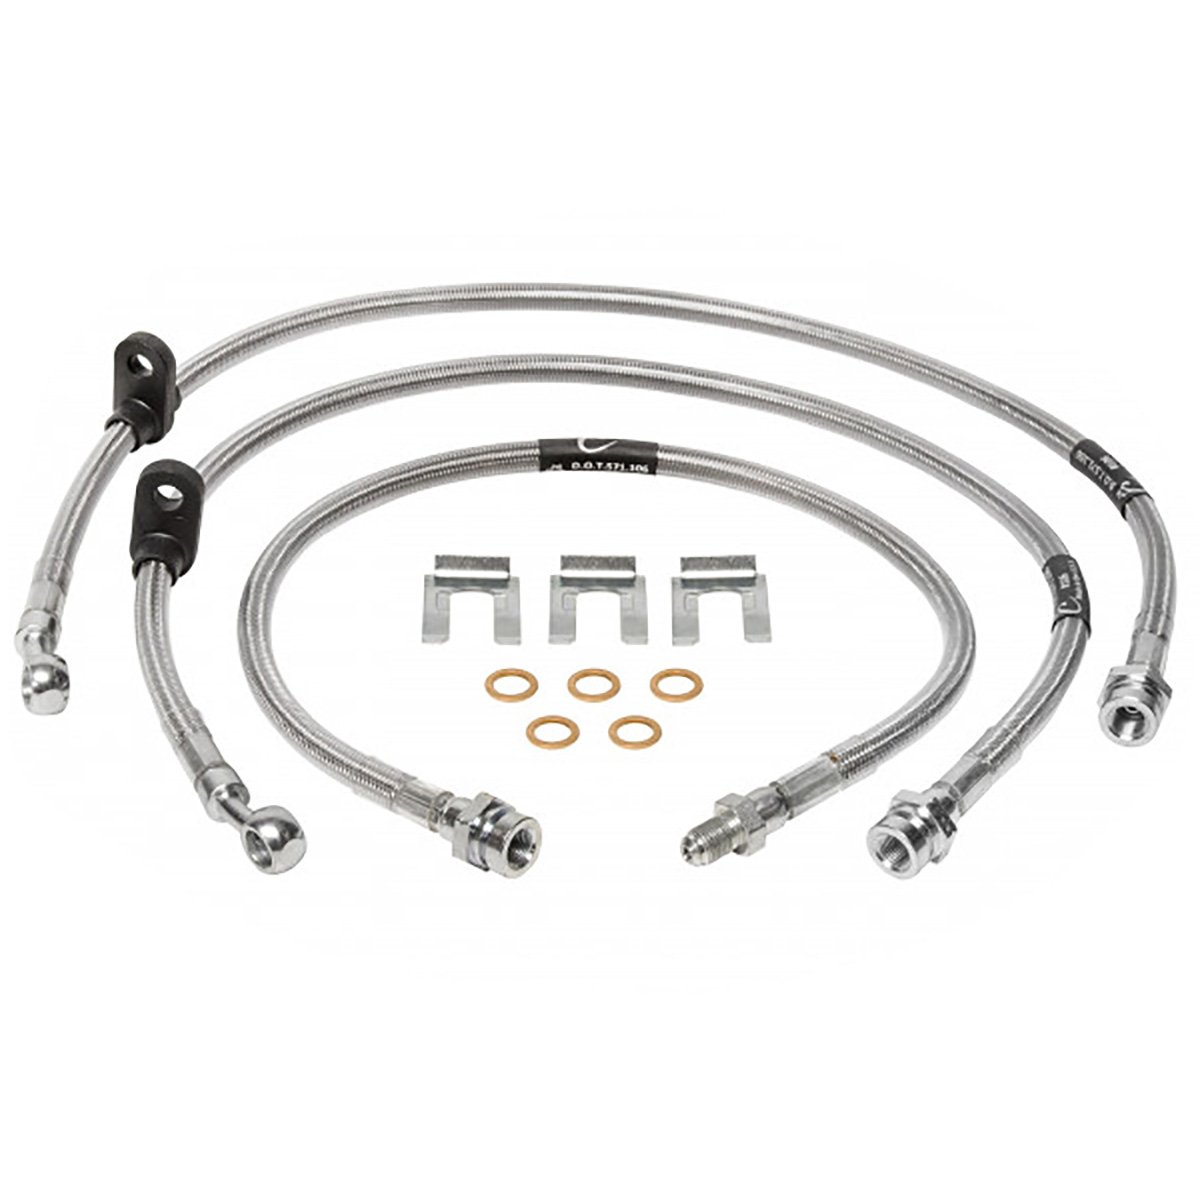 Extended Brake Line Kit for 1995.5-2004 Toyota Tacoma w/ 4 in. Lift